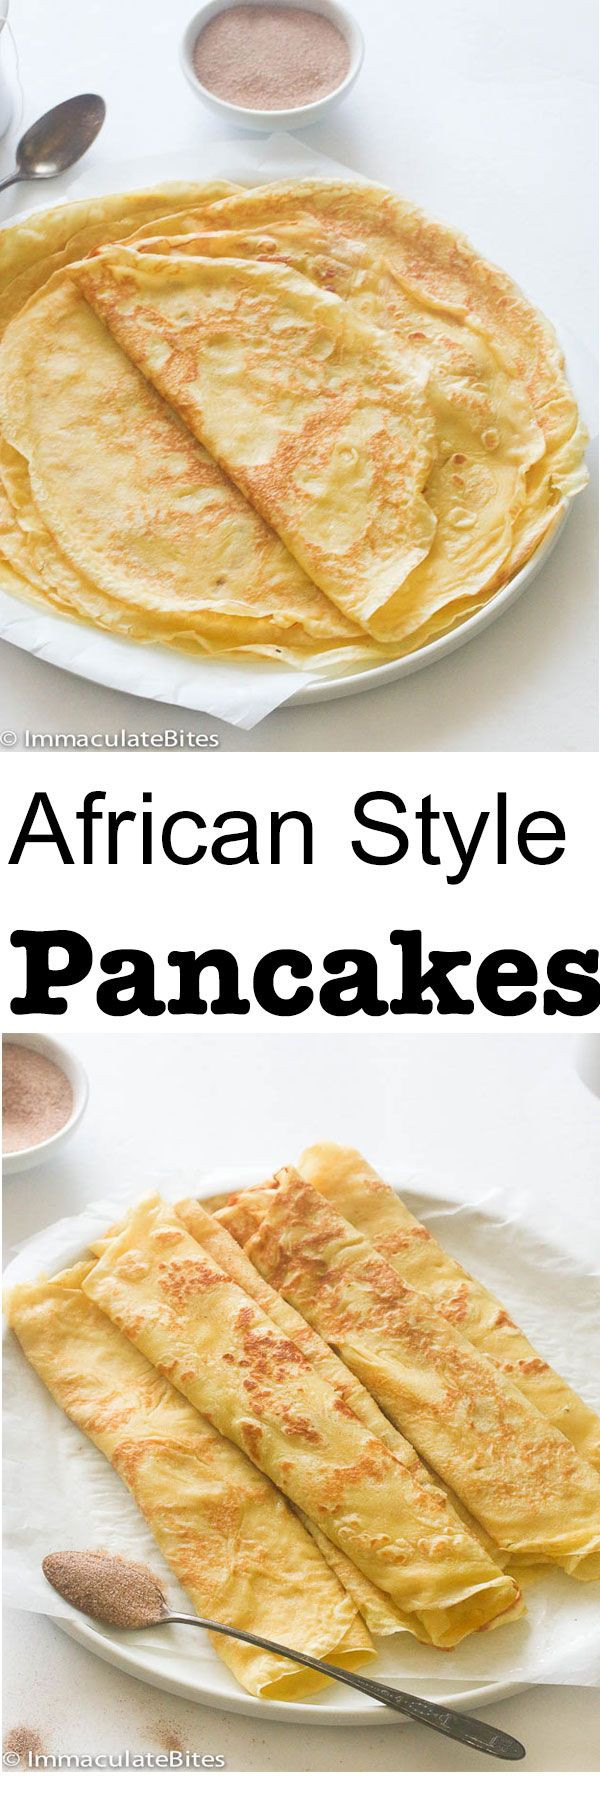 African Food Recipes For Kids
 African Pancakes Recipe